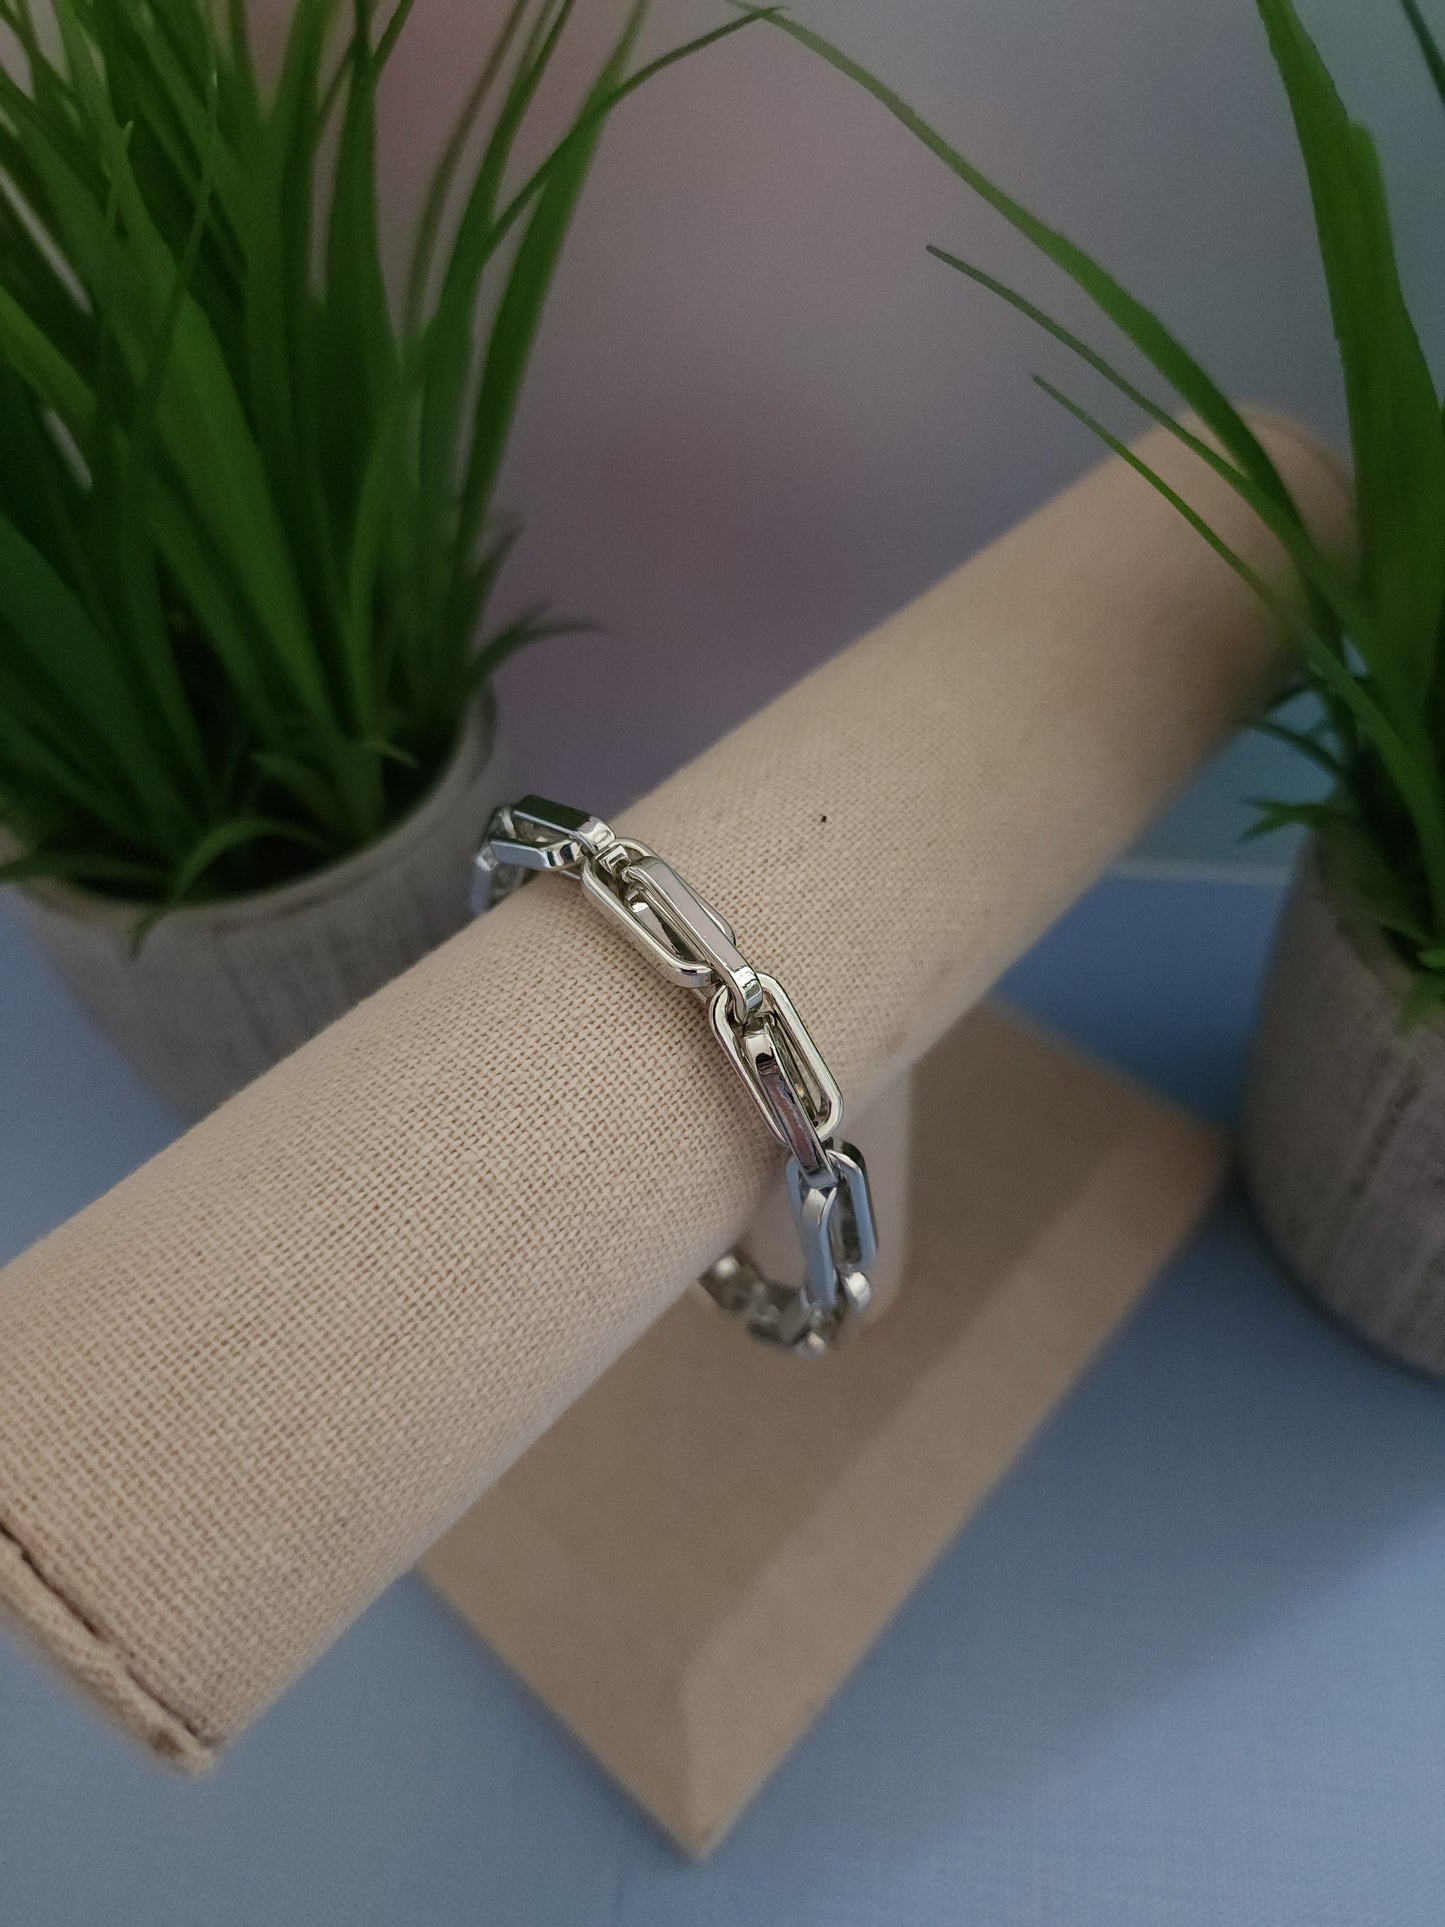 Chain Link Braclet